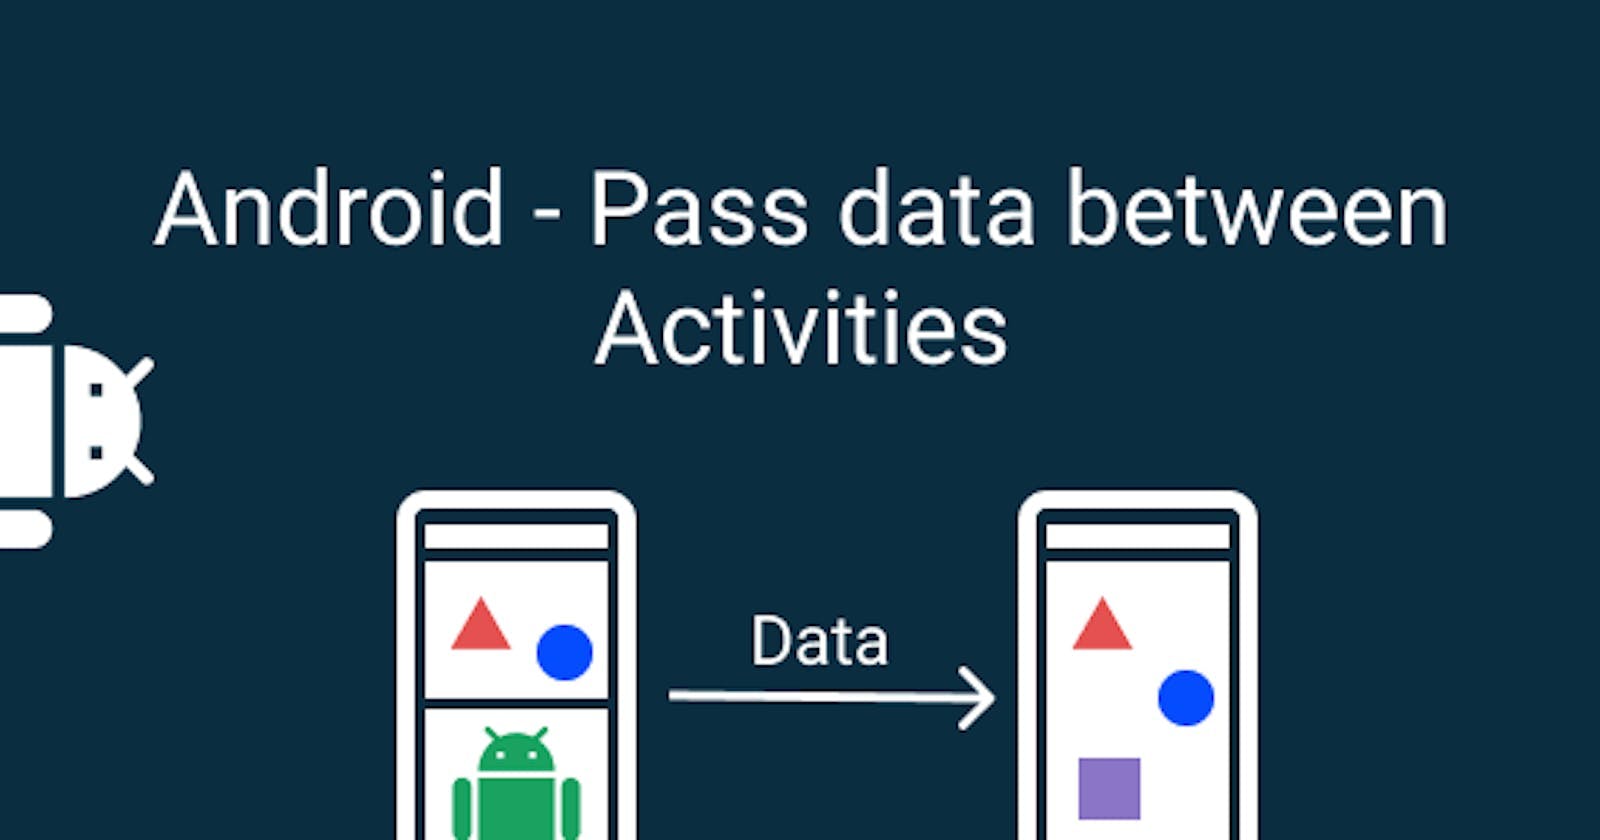 Pass data between Activities | Multi-page apps | Android Devs